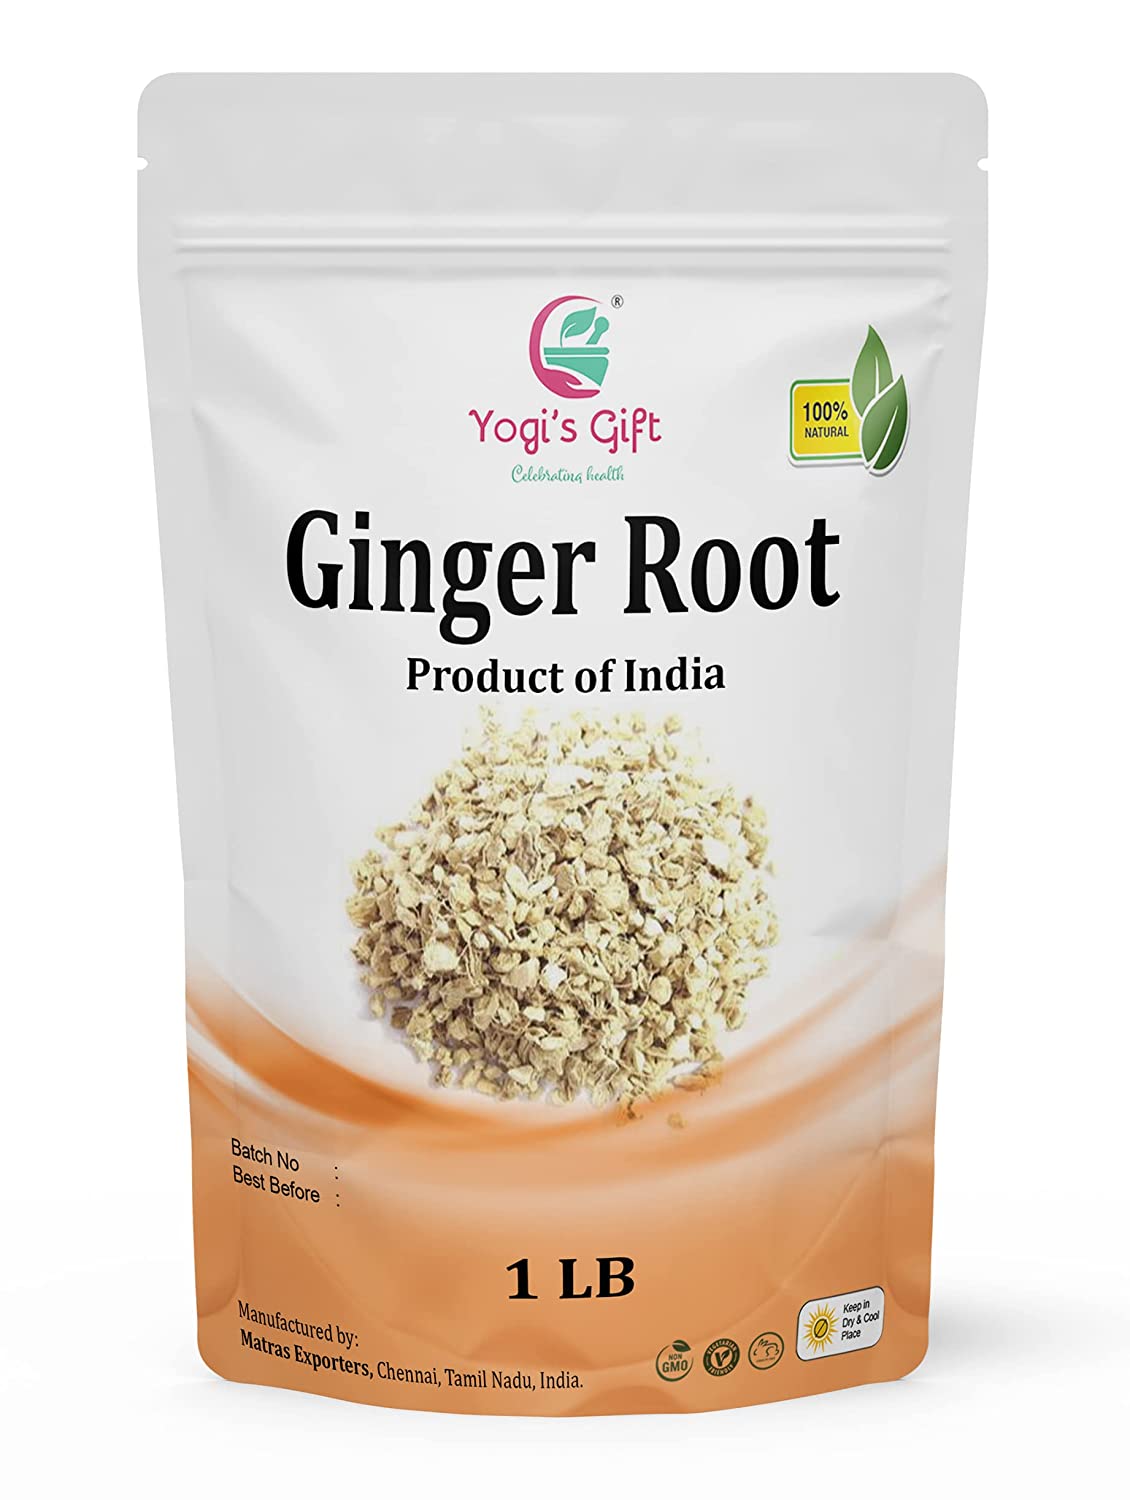 Dried Ginger Root 1 LB | Cut and Sifted Dried Ginger Pieces | Flavourful Indian Spice |Pure and Natural For Making Flavourful Ginger Tea |Yogi's Gift®